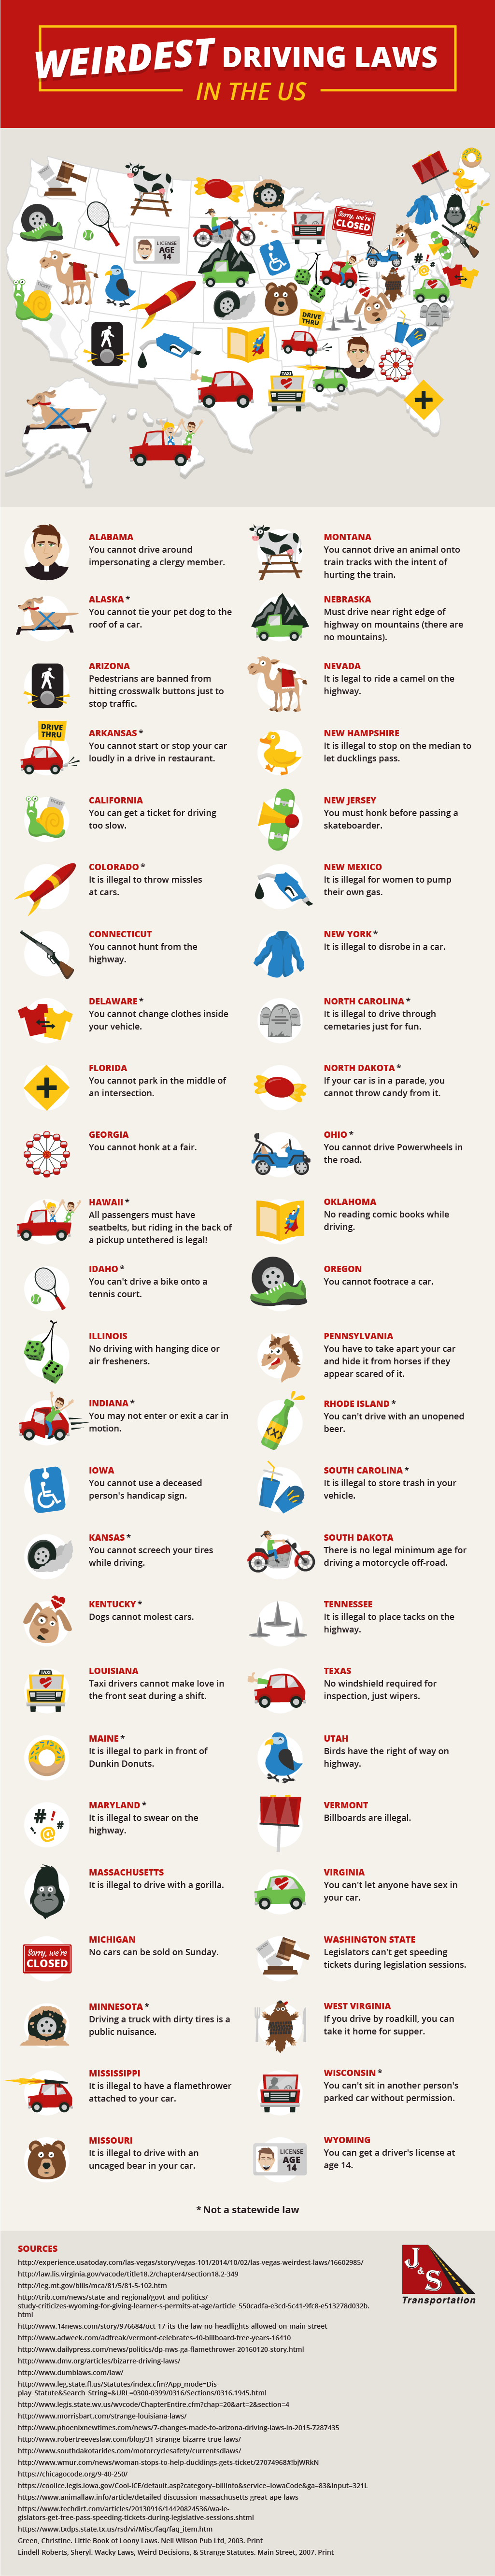 Weirdest Driving Laws in the US